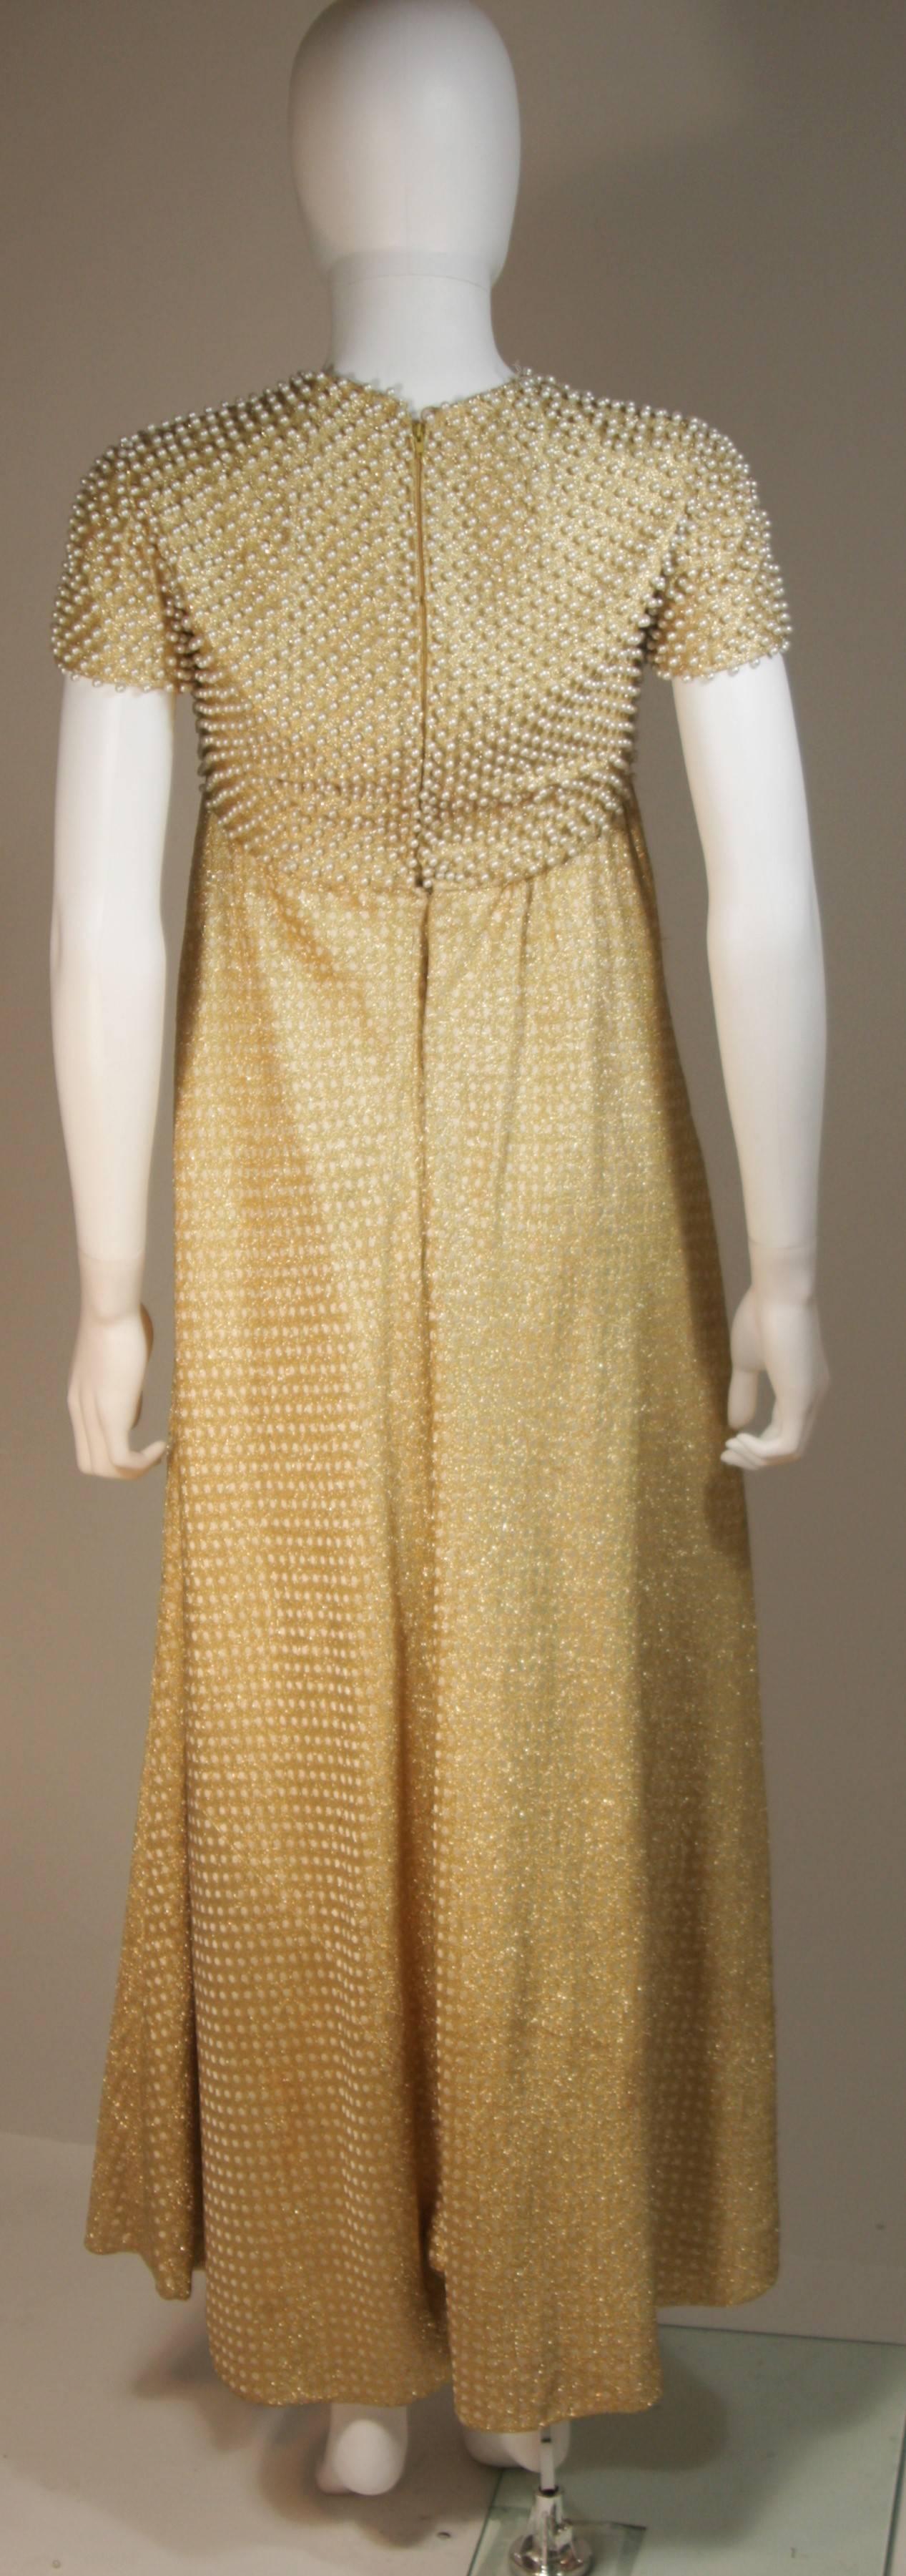 Women's GEOFFREY BEENE 1960's Gold Lame Pearl Bodice Baby Doll Gown Size 2-4 For Sale